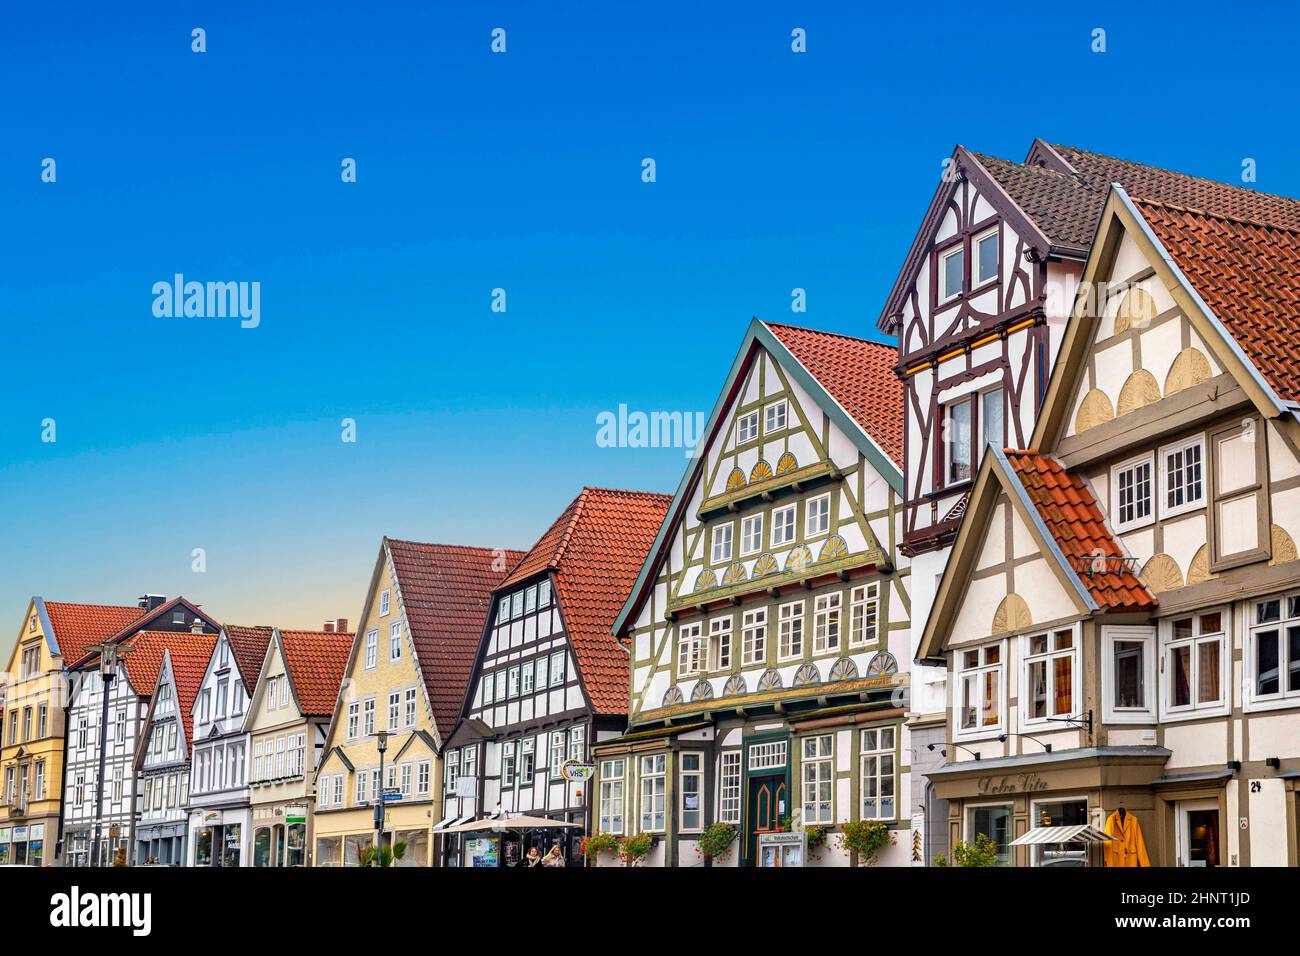 scenic old half timbered houses in the town of Detmold in the Lippe area in Germany Stock Photo